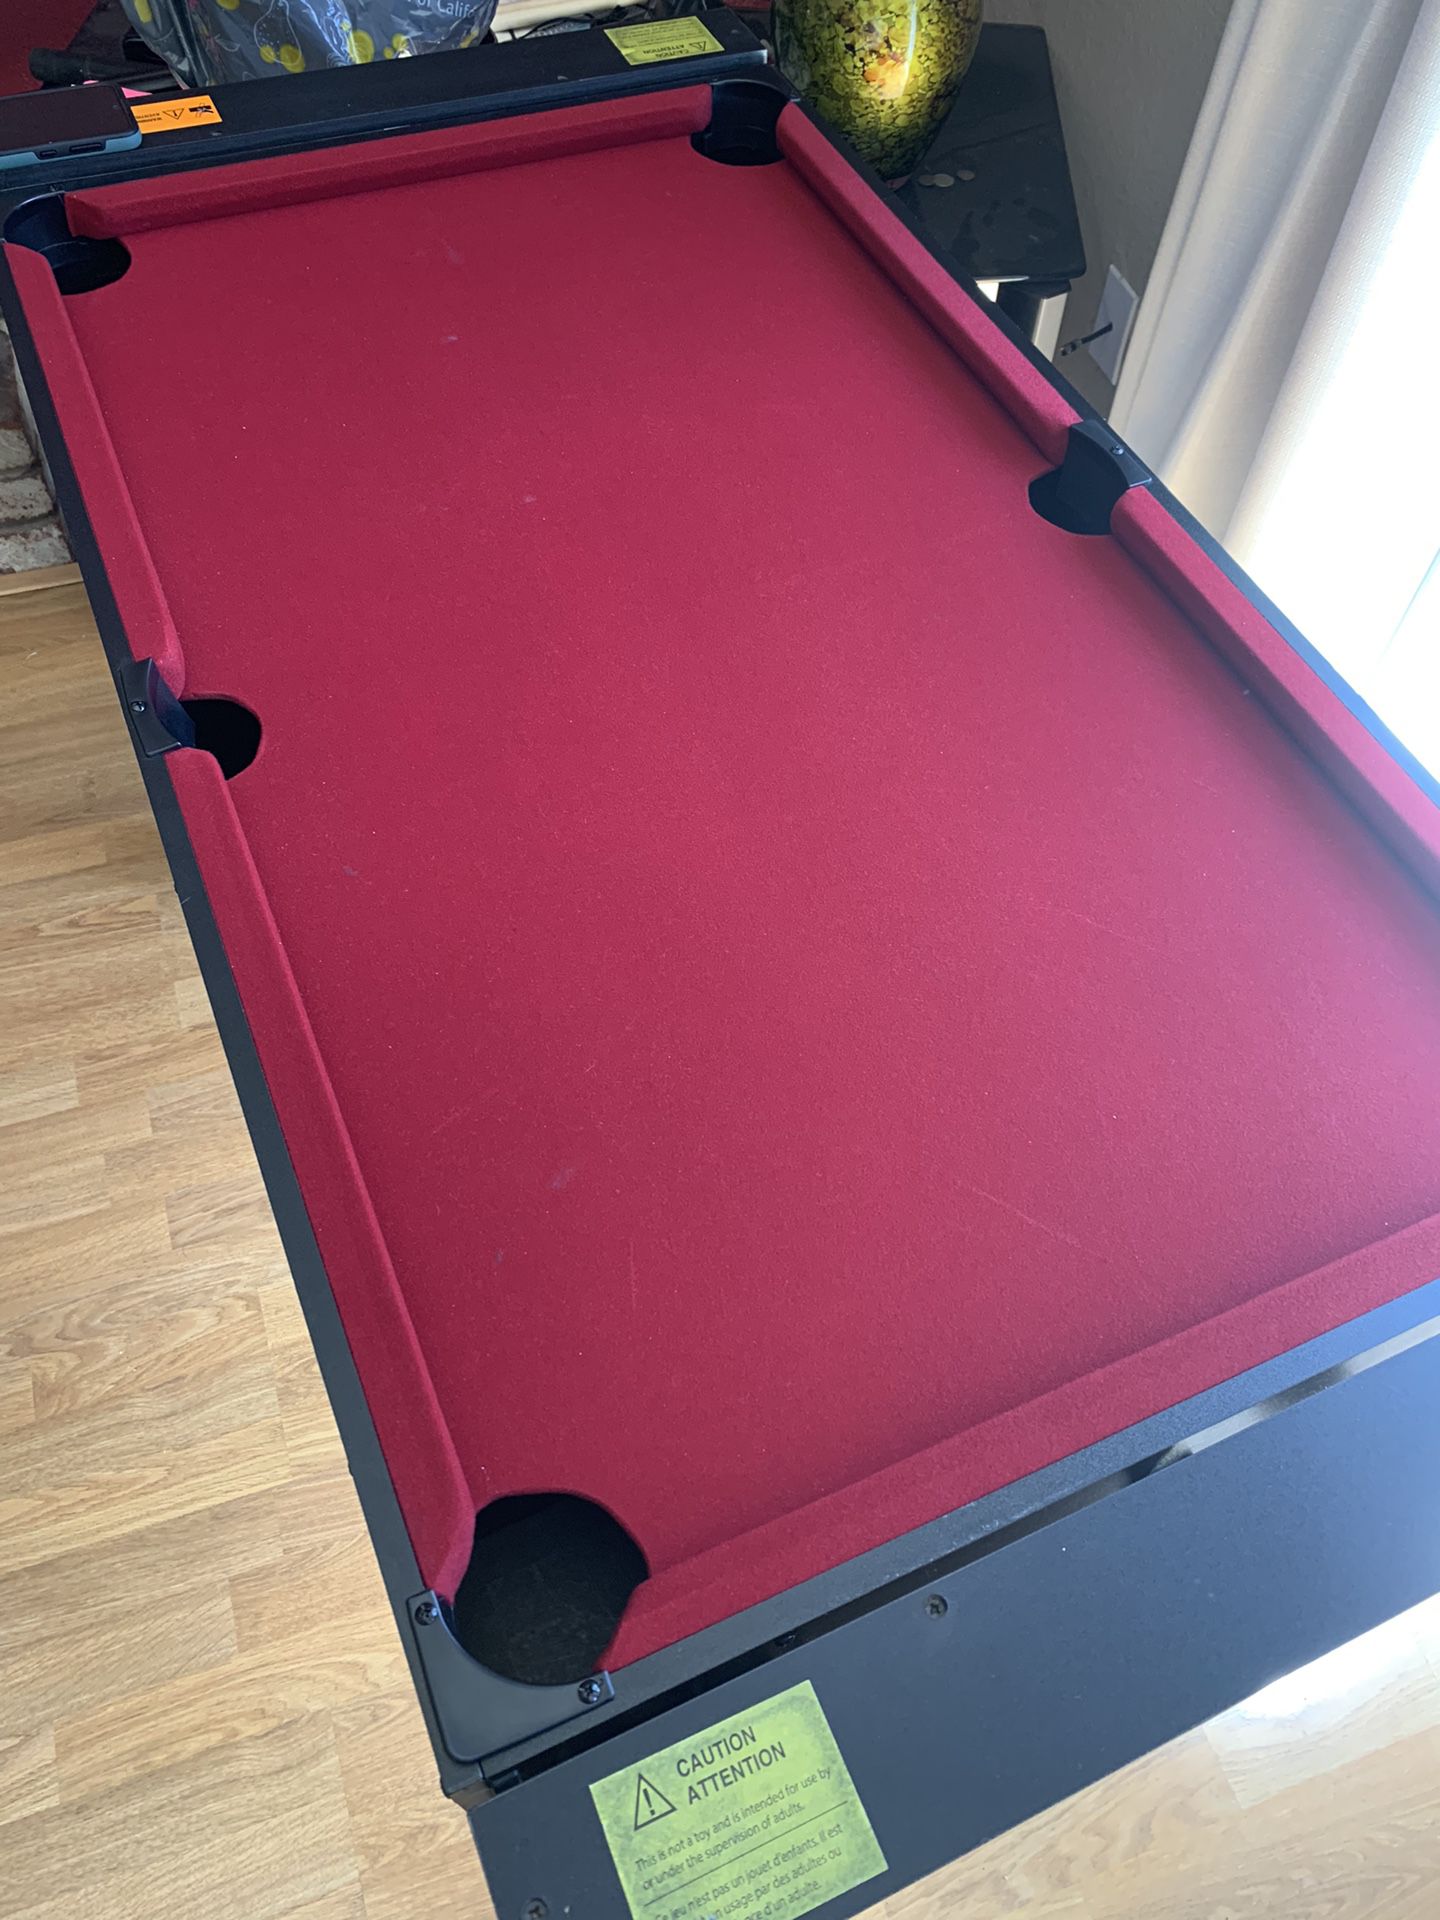 5 In 1 playing table for kids